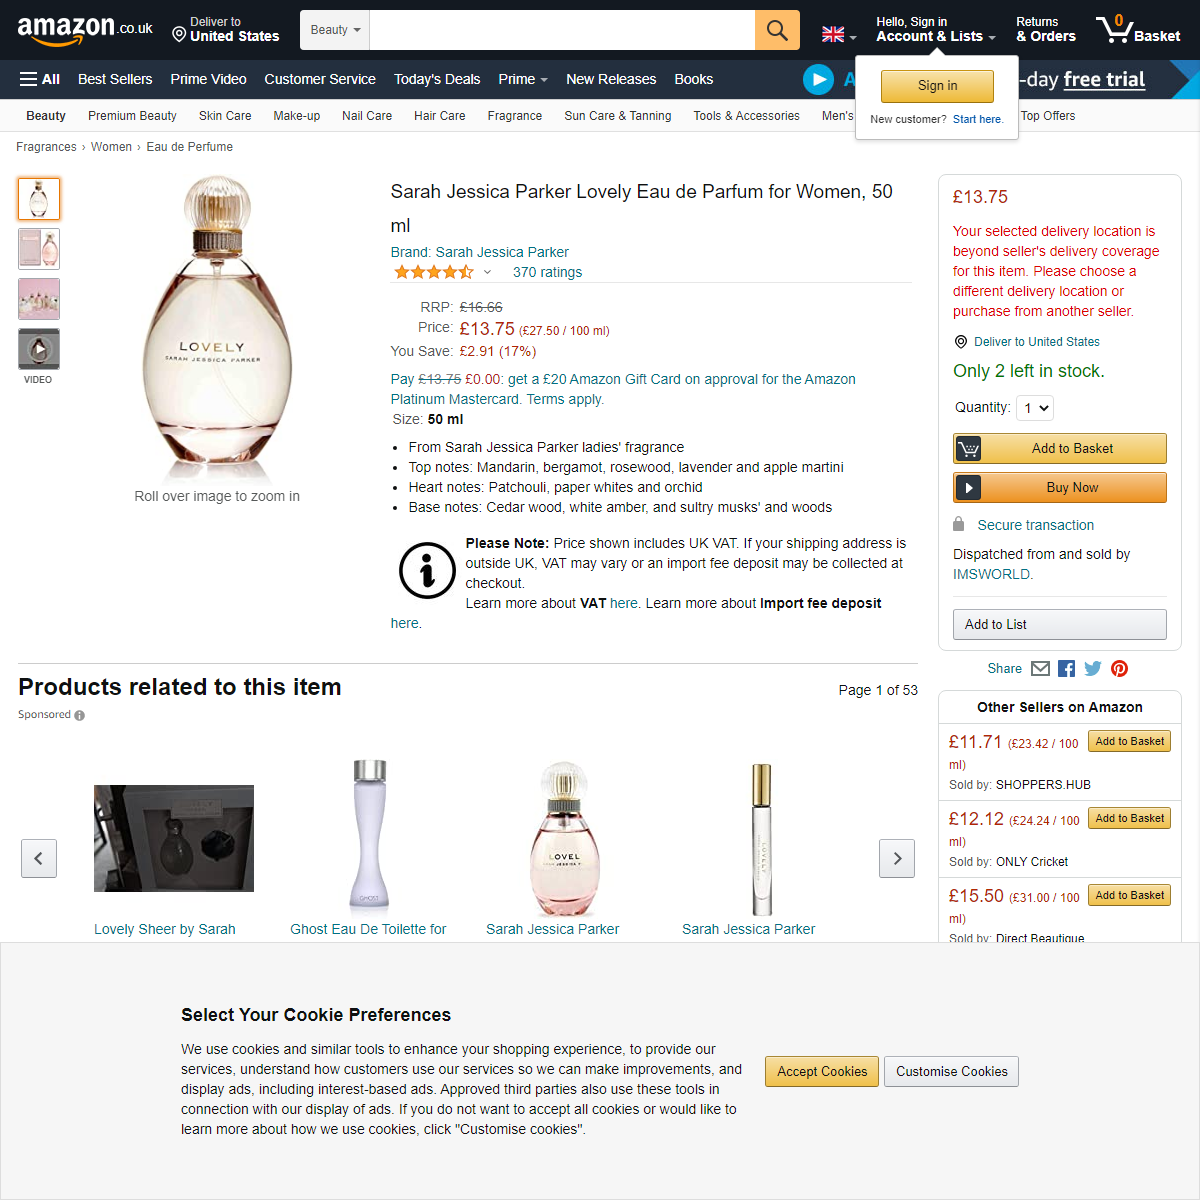 A complete backup of https://www.amazon.co.uk/Sarah-Jessica-Parker-Lovely-Parfum/dp/B000P22YM0